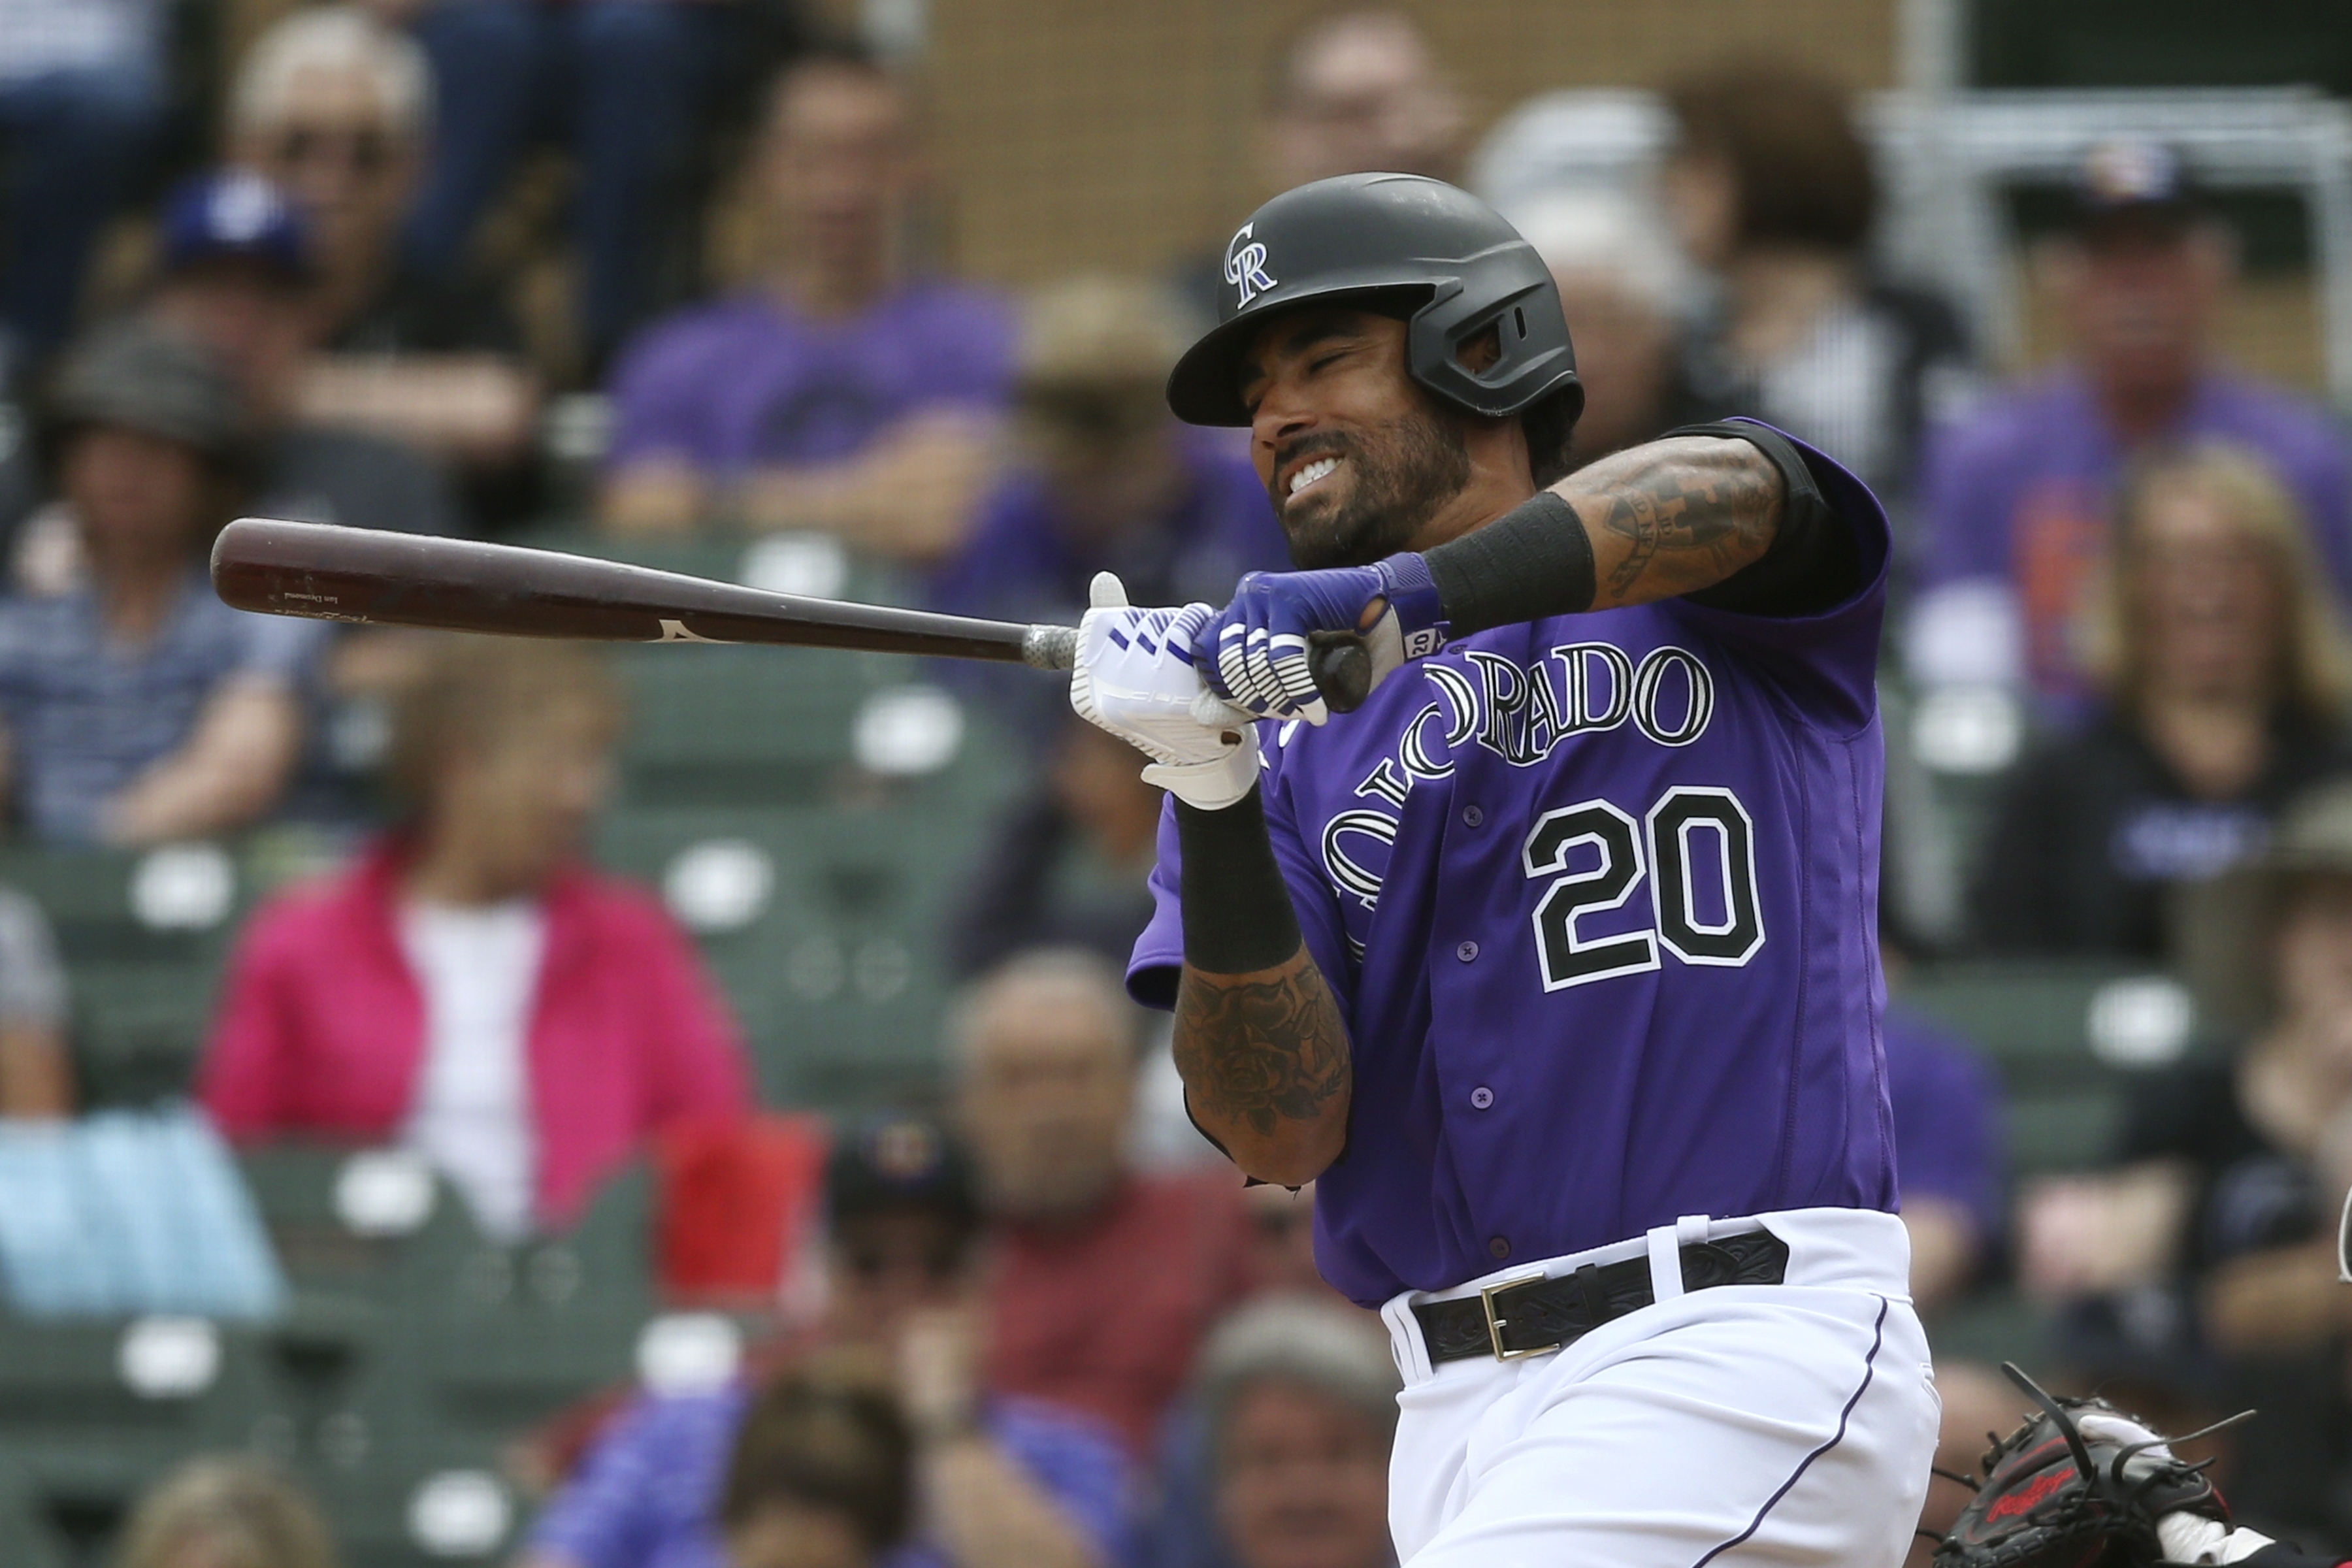 Ian Desmond won't play in the upcoming MLB season, citing racism